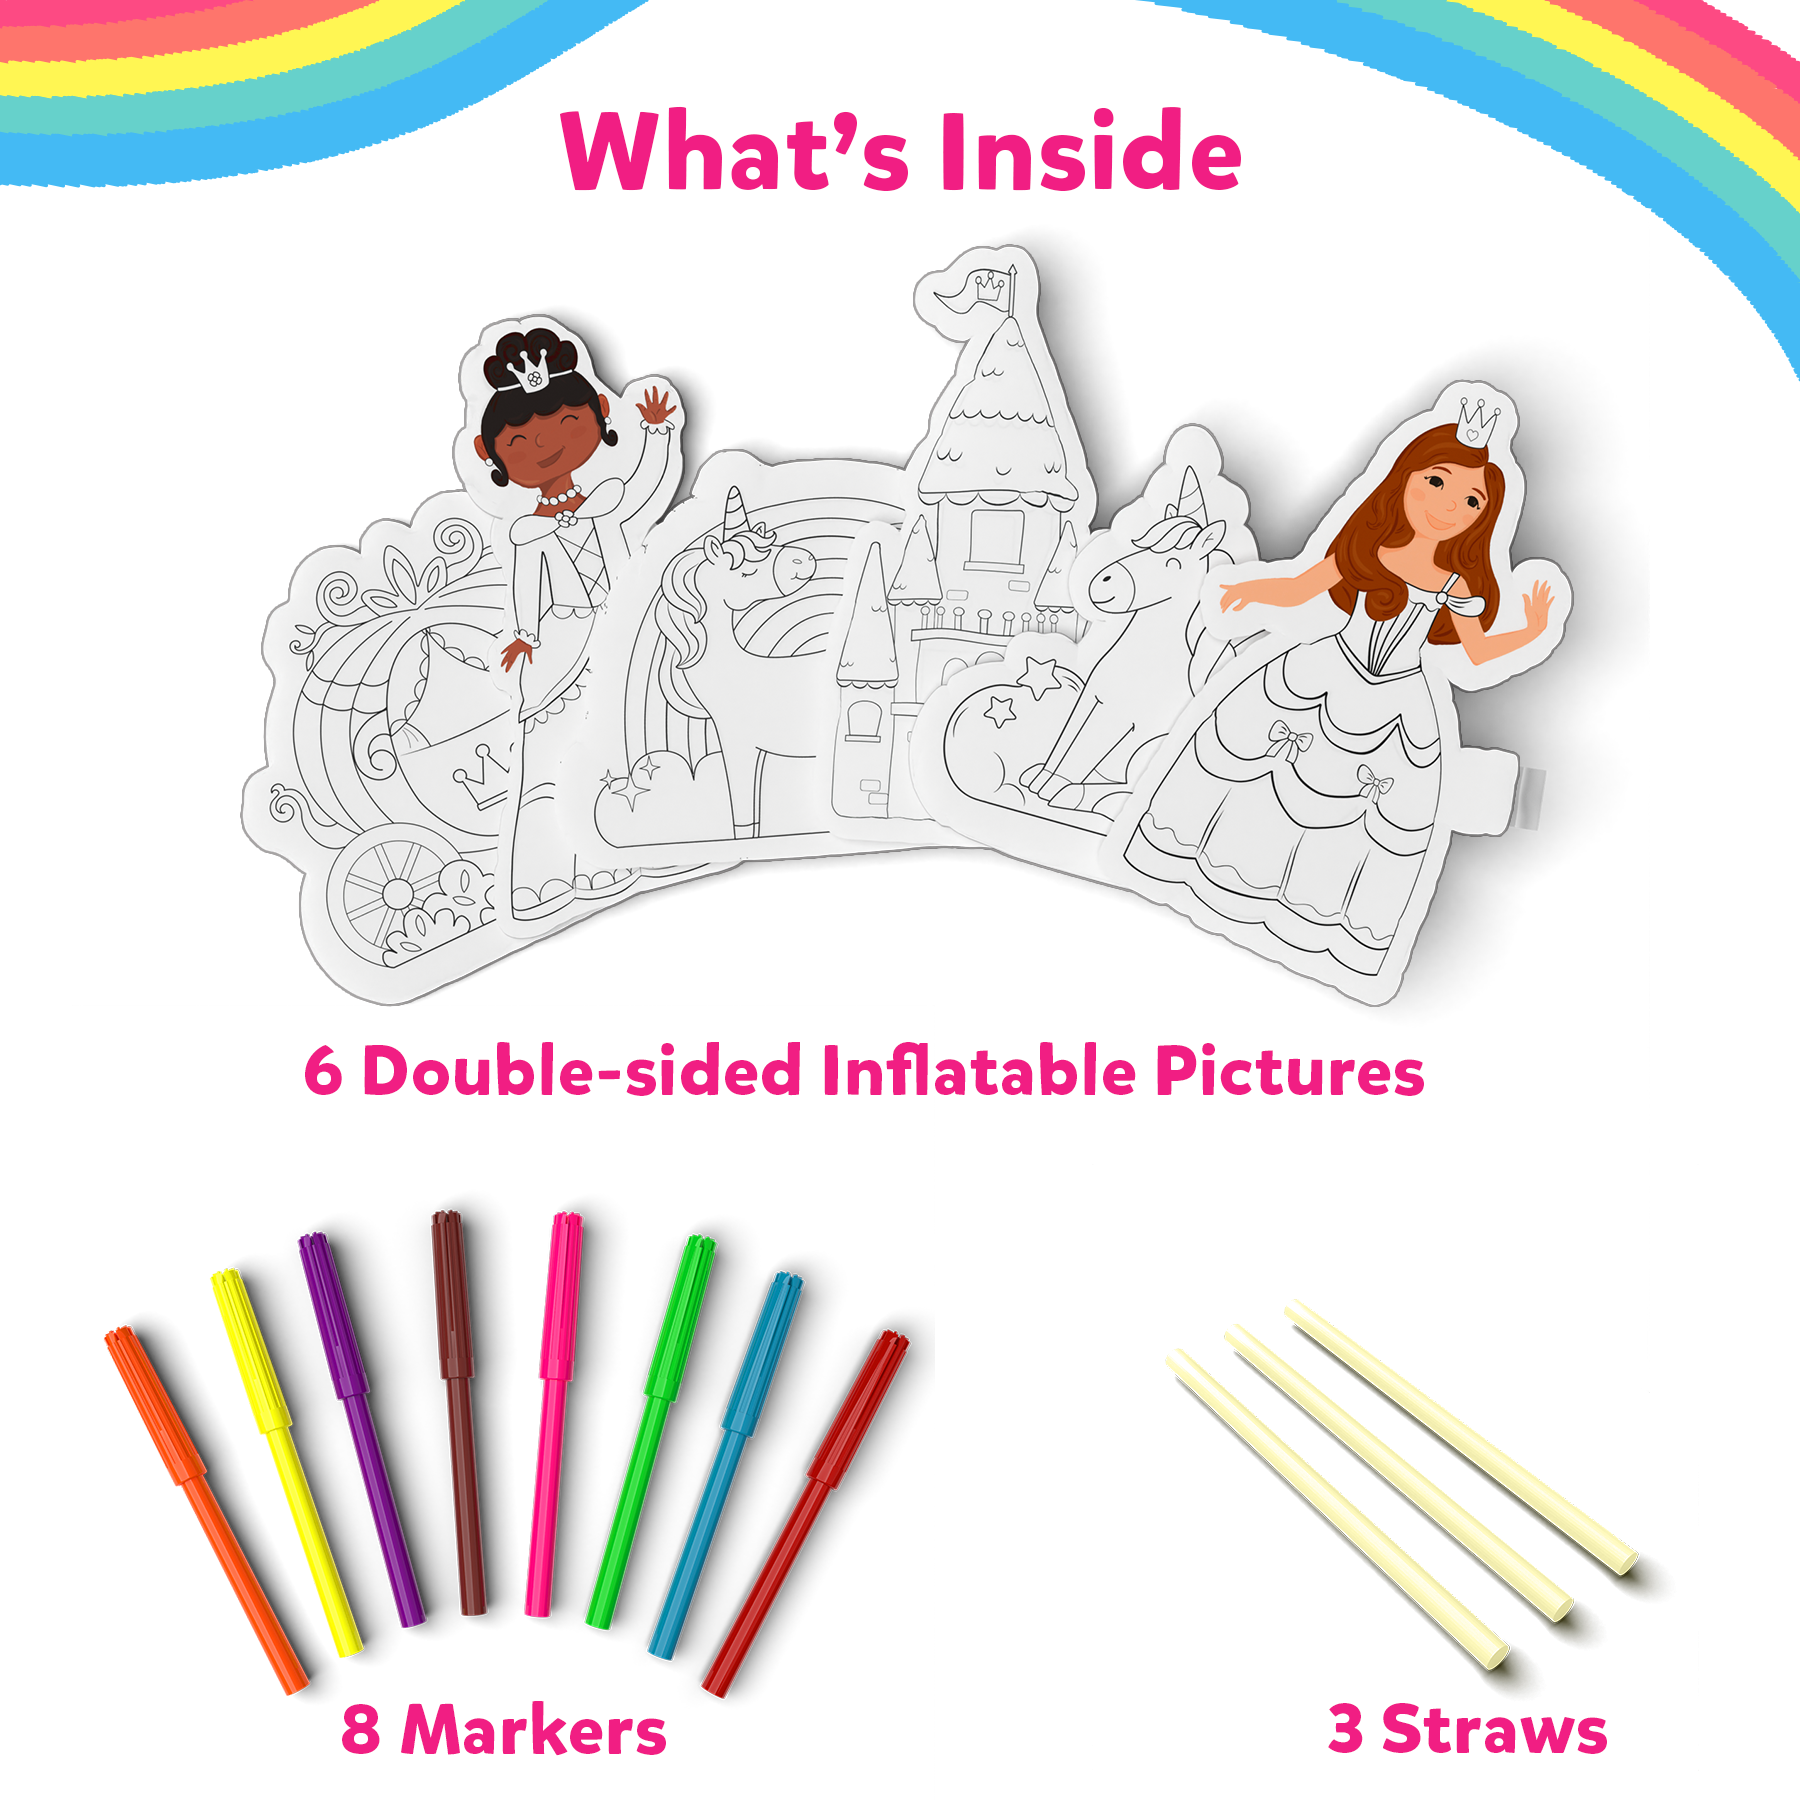 Skillmatics Inflatable Art for Kids - 3D Unicorns & Princesses, Preschool Craft Kits, Fun DIY Activity, Coloring Set, Gifts for Boys & Girls Ages 4, 5, 6, 7